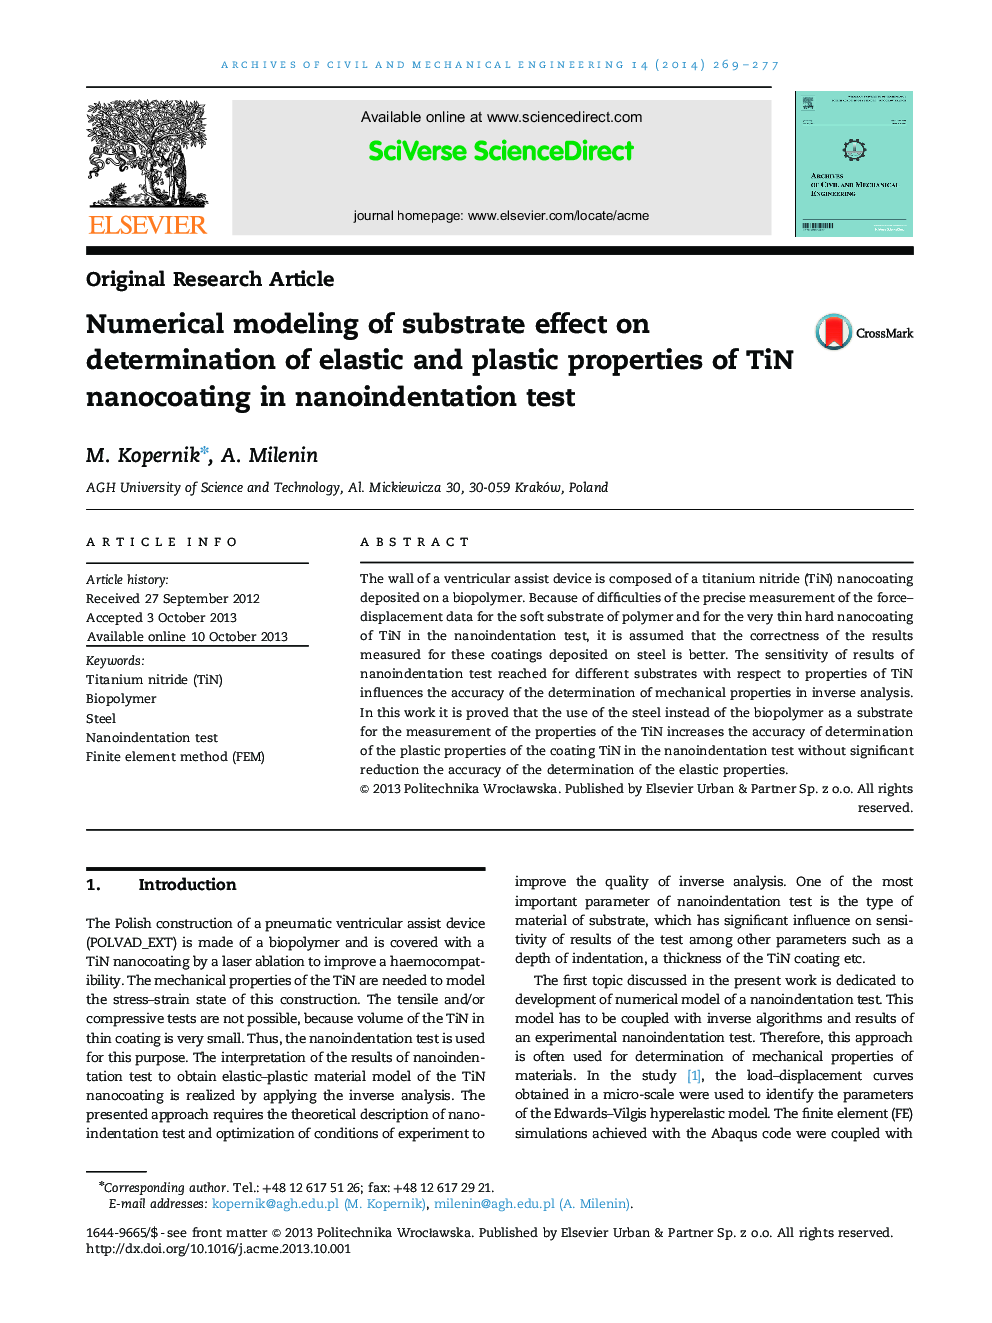 Numerical modeling of substrate effect on determination of elastic and plastic properties of TiN nanocoating in nanoindentation test